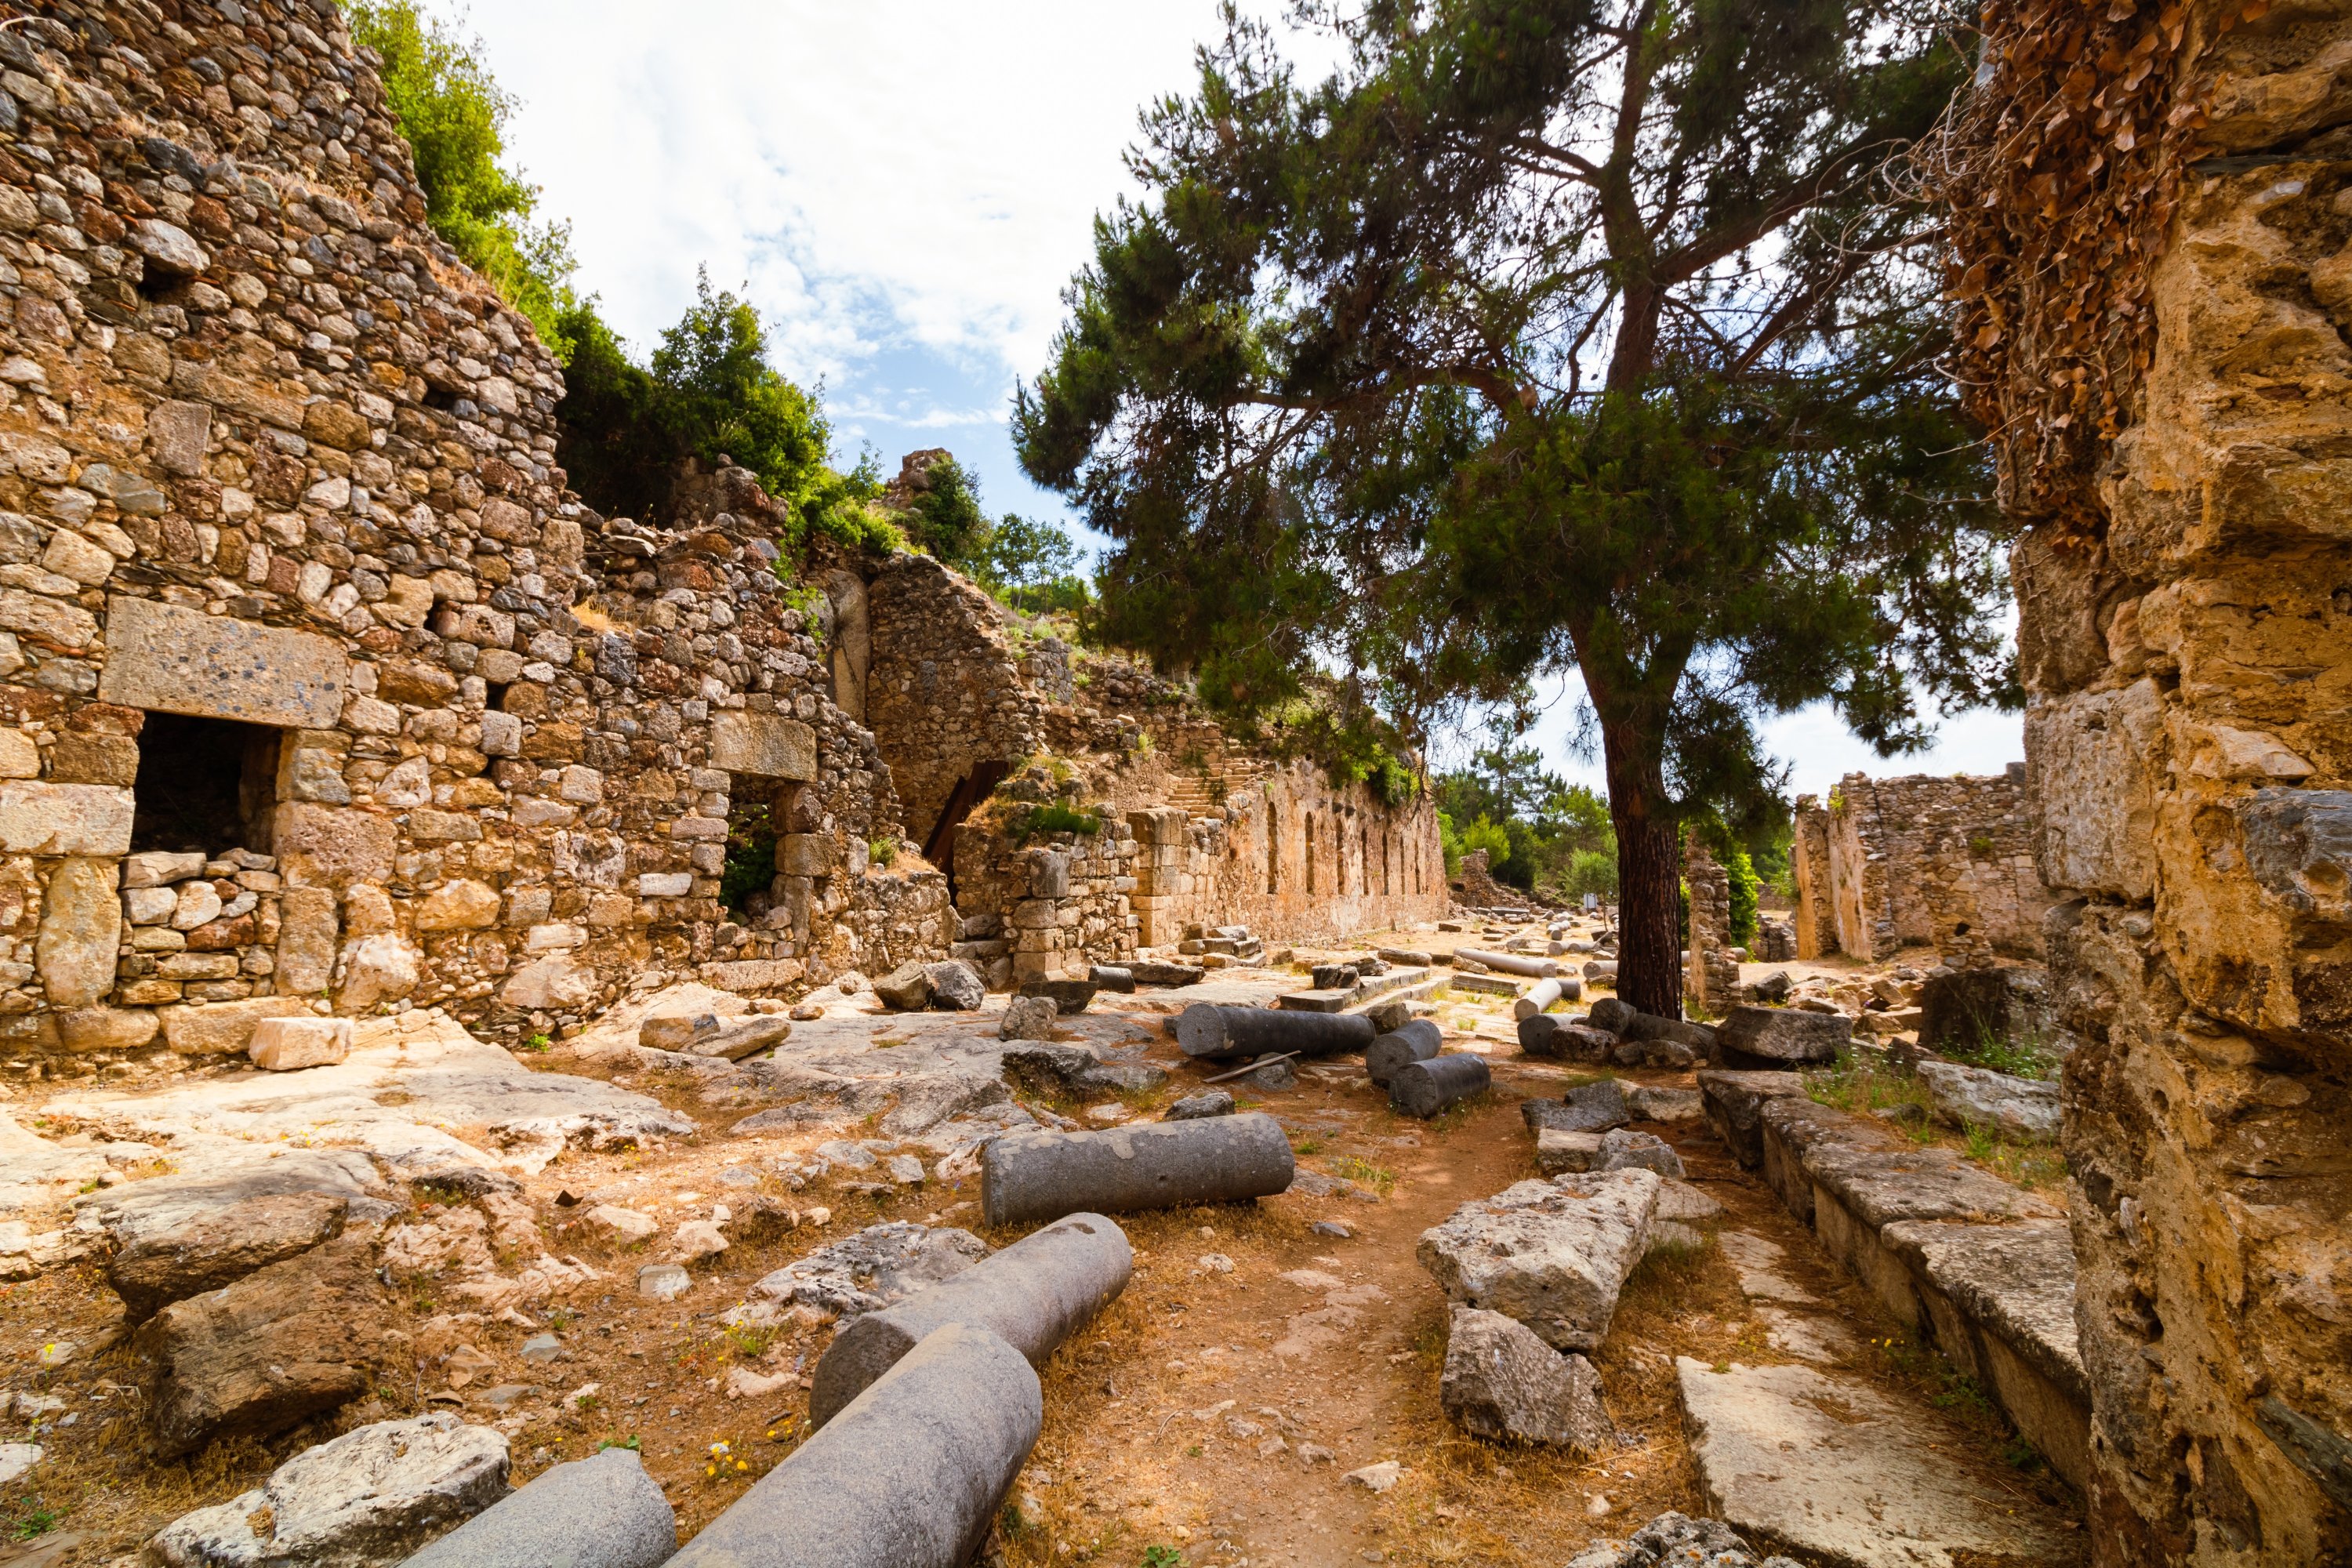 A view from the ruins of the ancient city of Syedra, Antalya, southern Turkey. (Shutterstock)